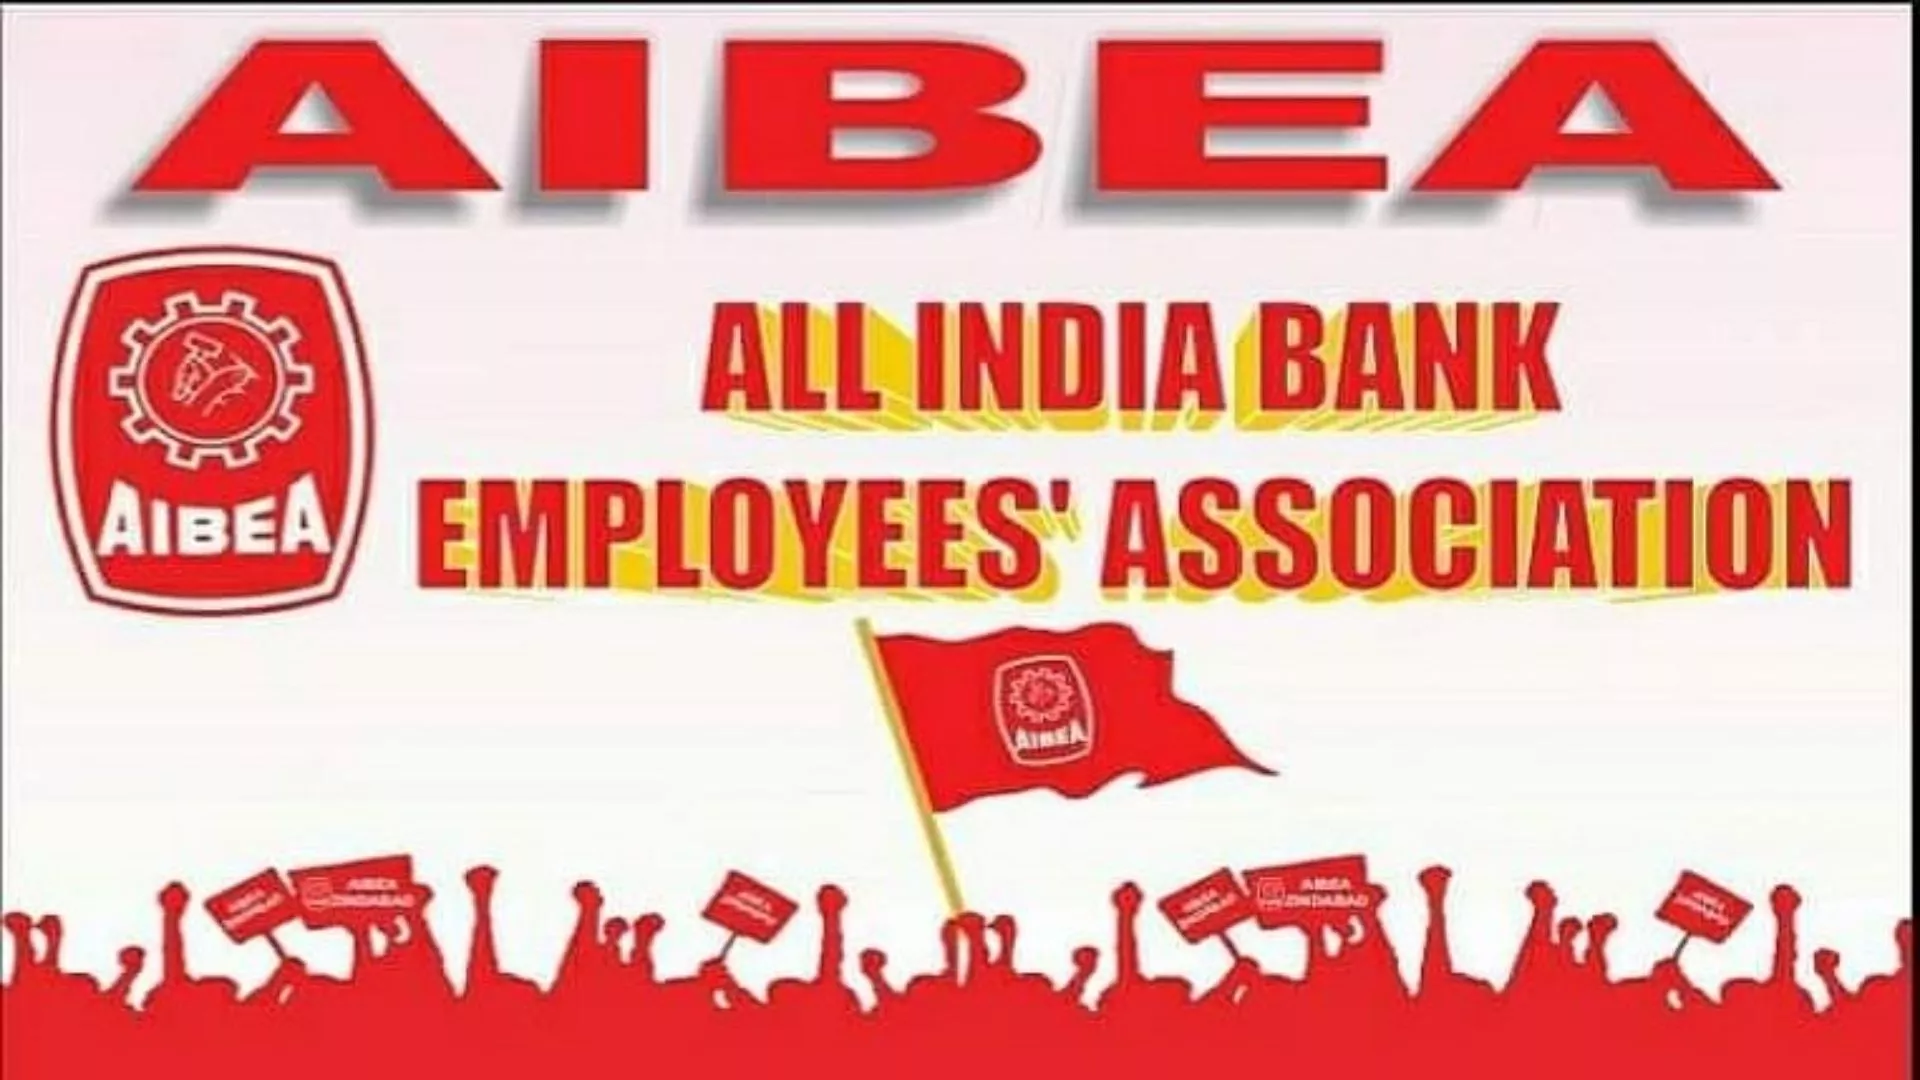 Govt Infusing Capital in Banks Only Short Term Solution: AIBEA - News18